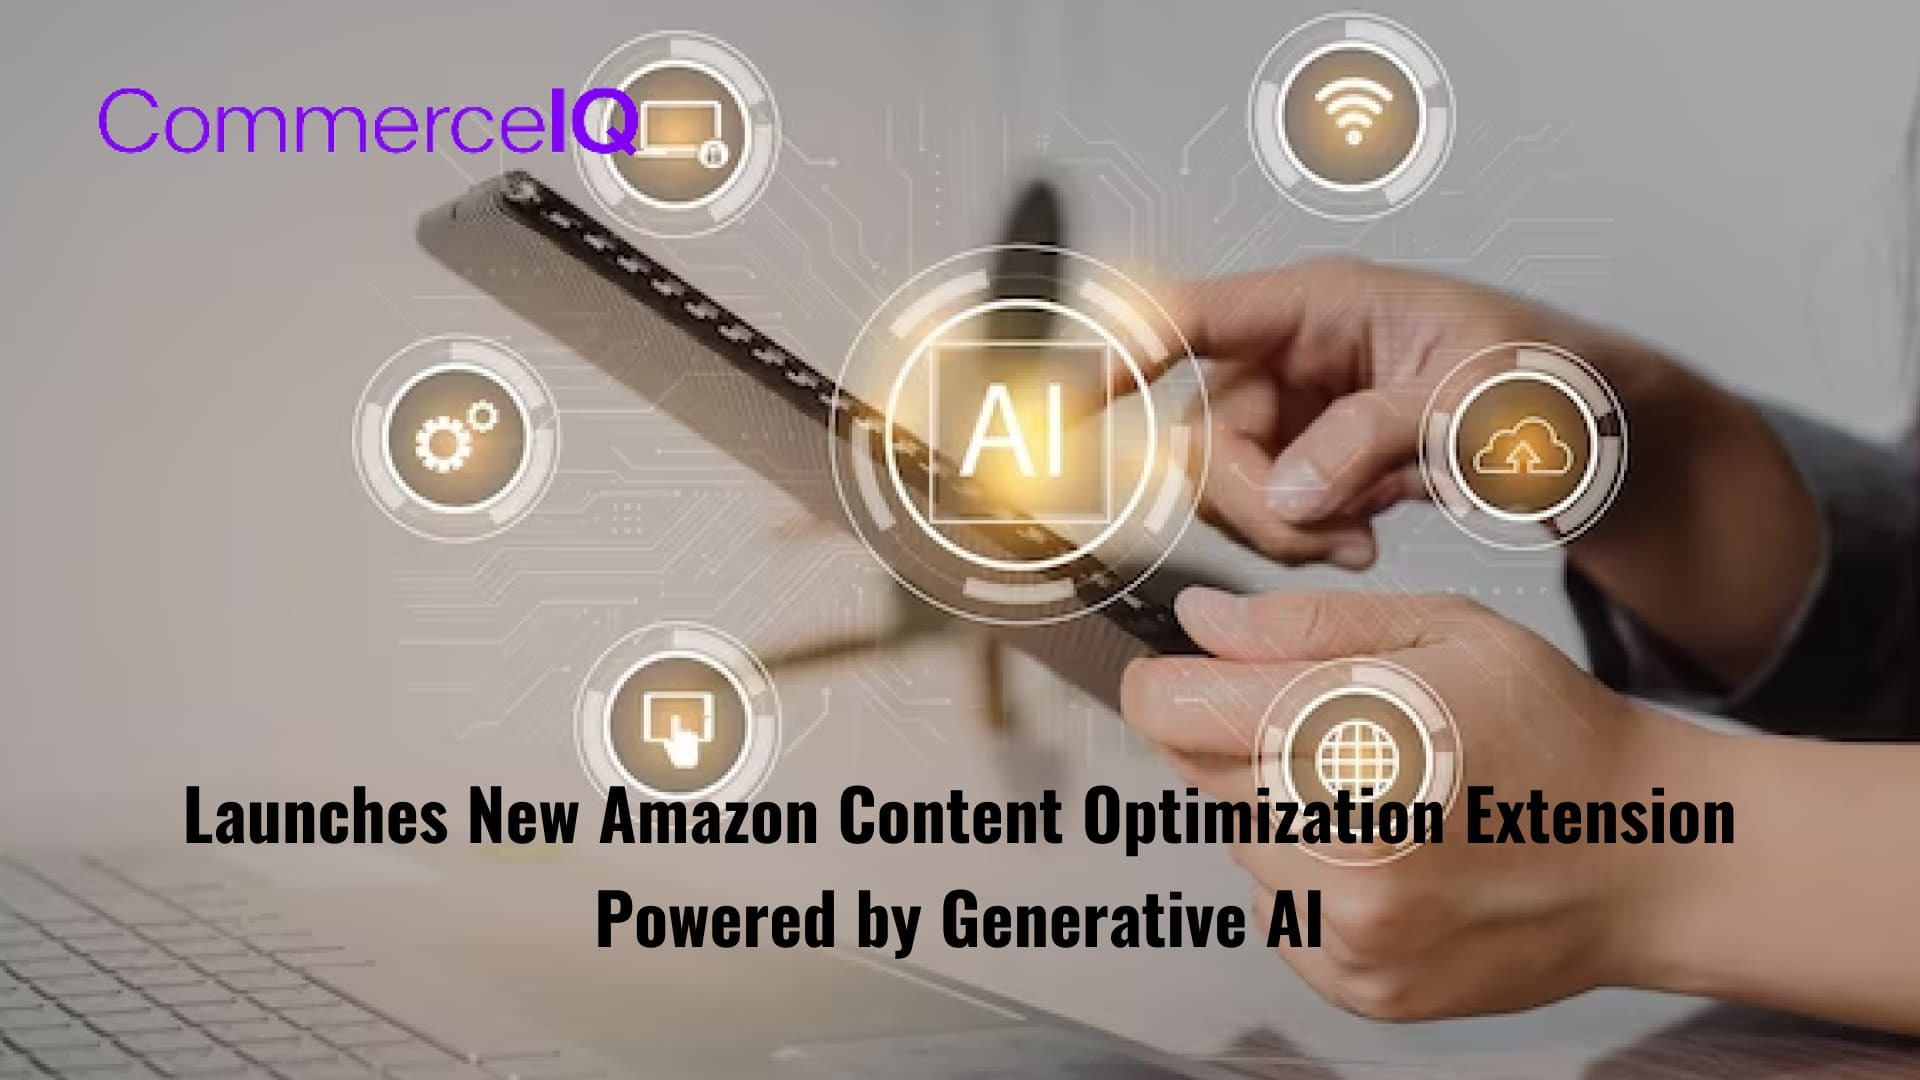 CommerceIQ Launches New Amazon Content Optimization Extension Powered by Generative AI